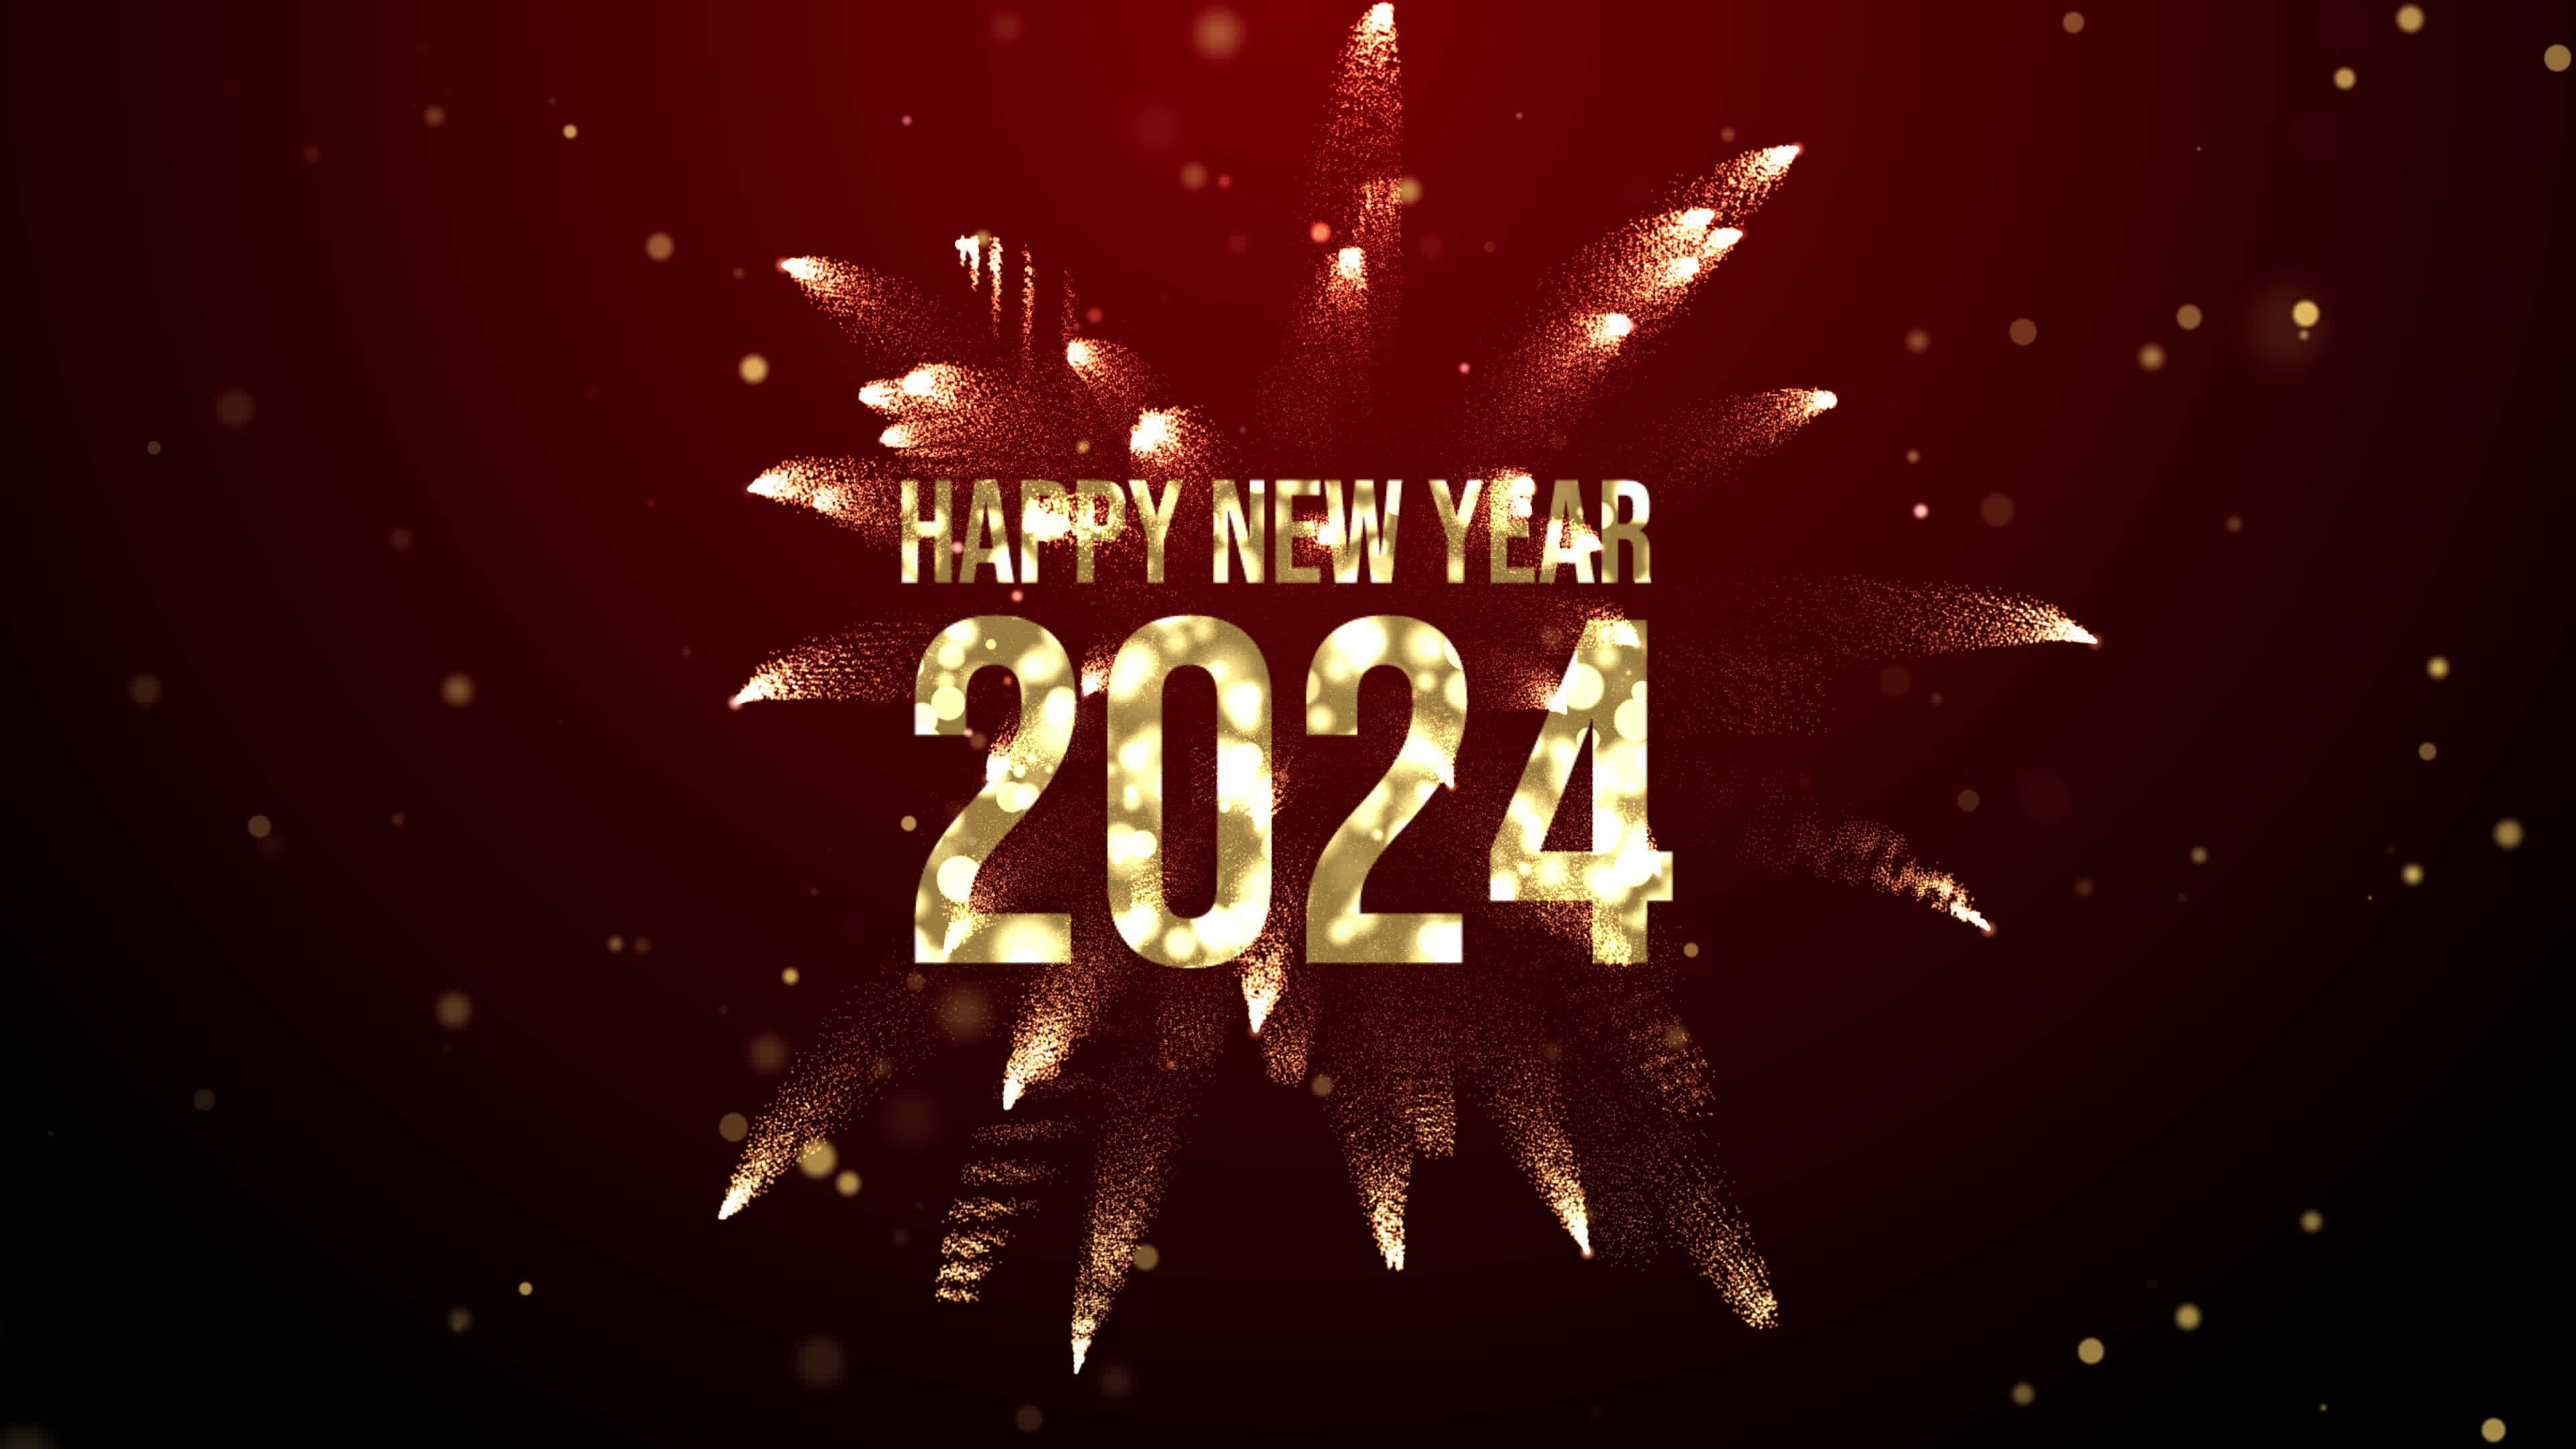 happy new year eve 2024 celebration golden text red black background free 4k wallpaper